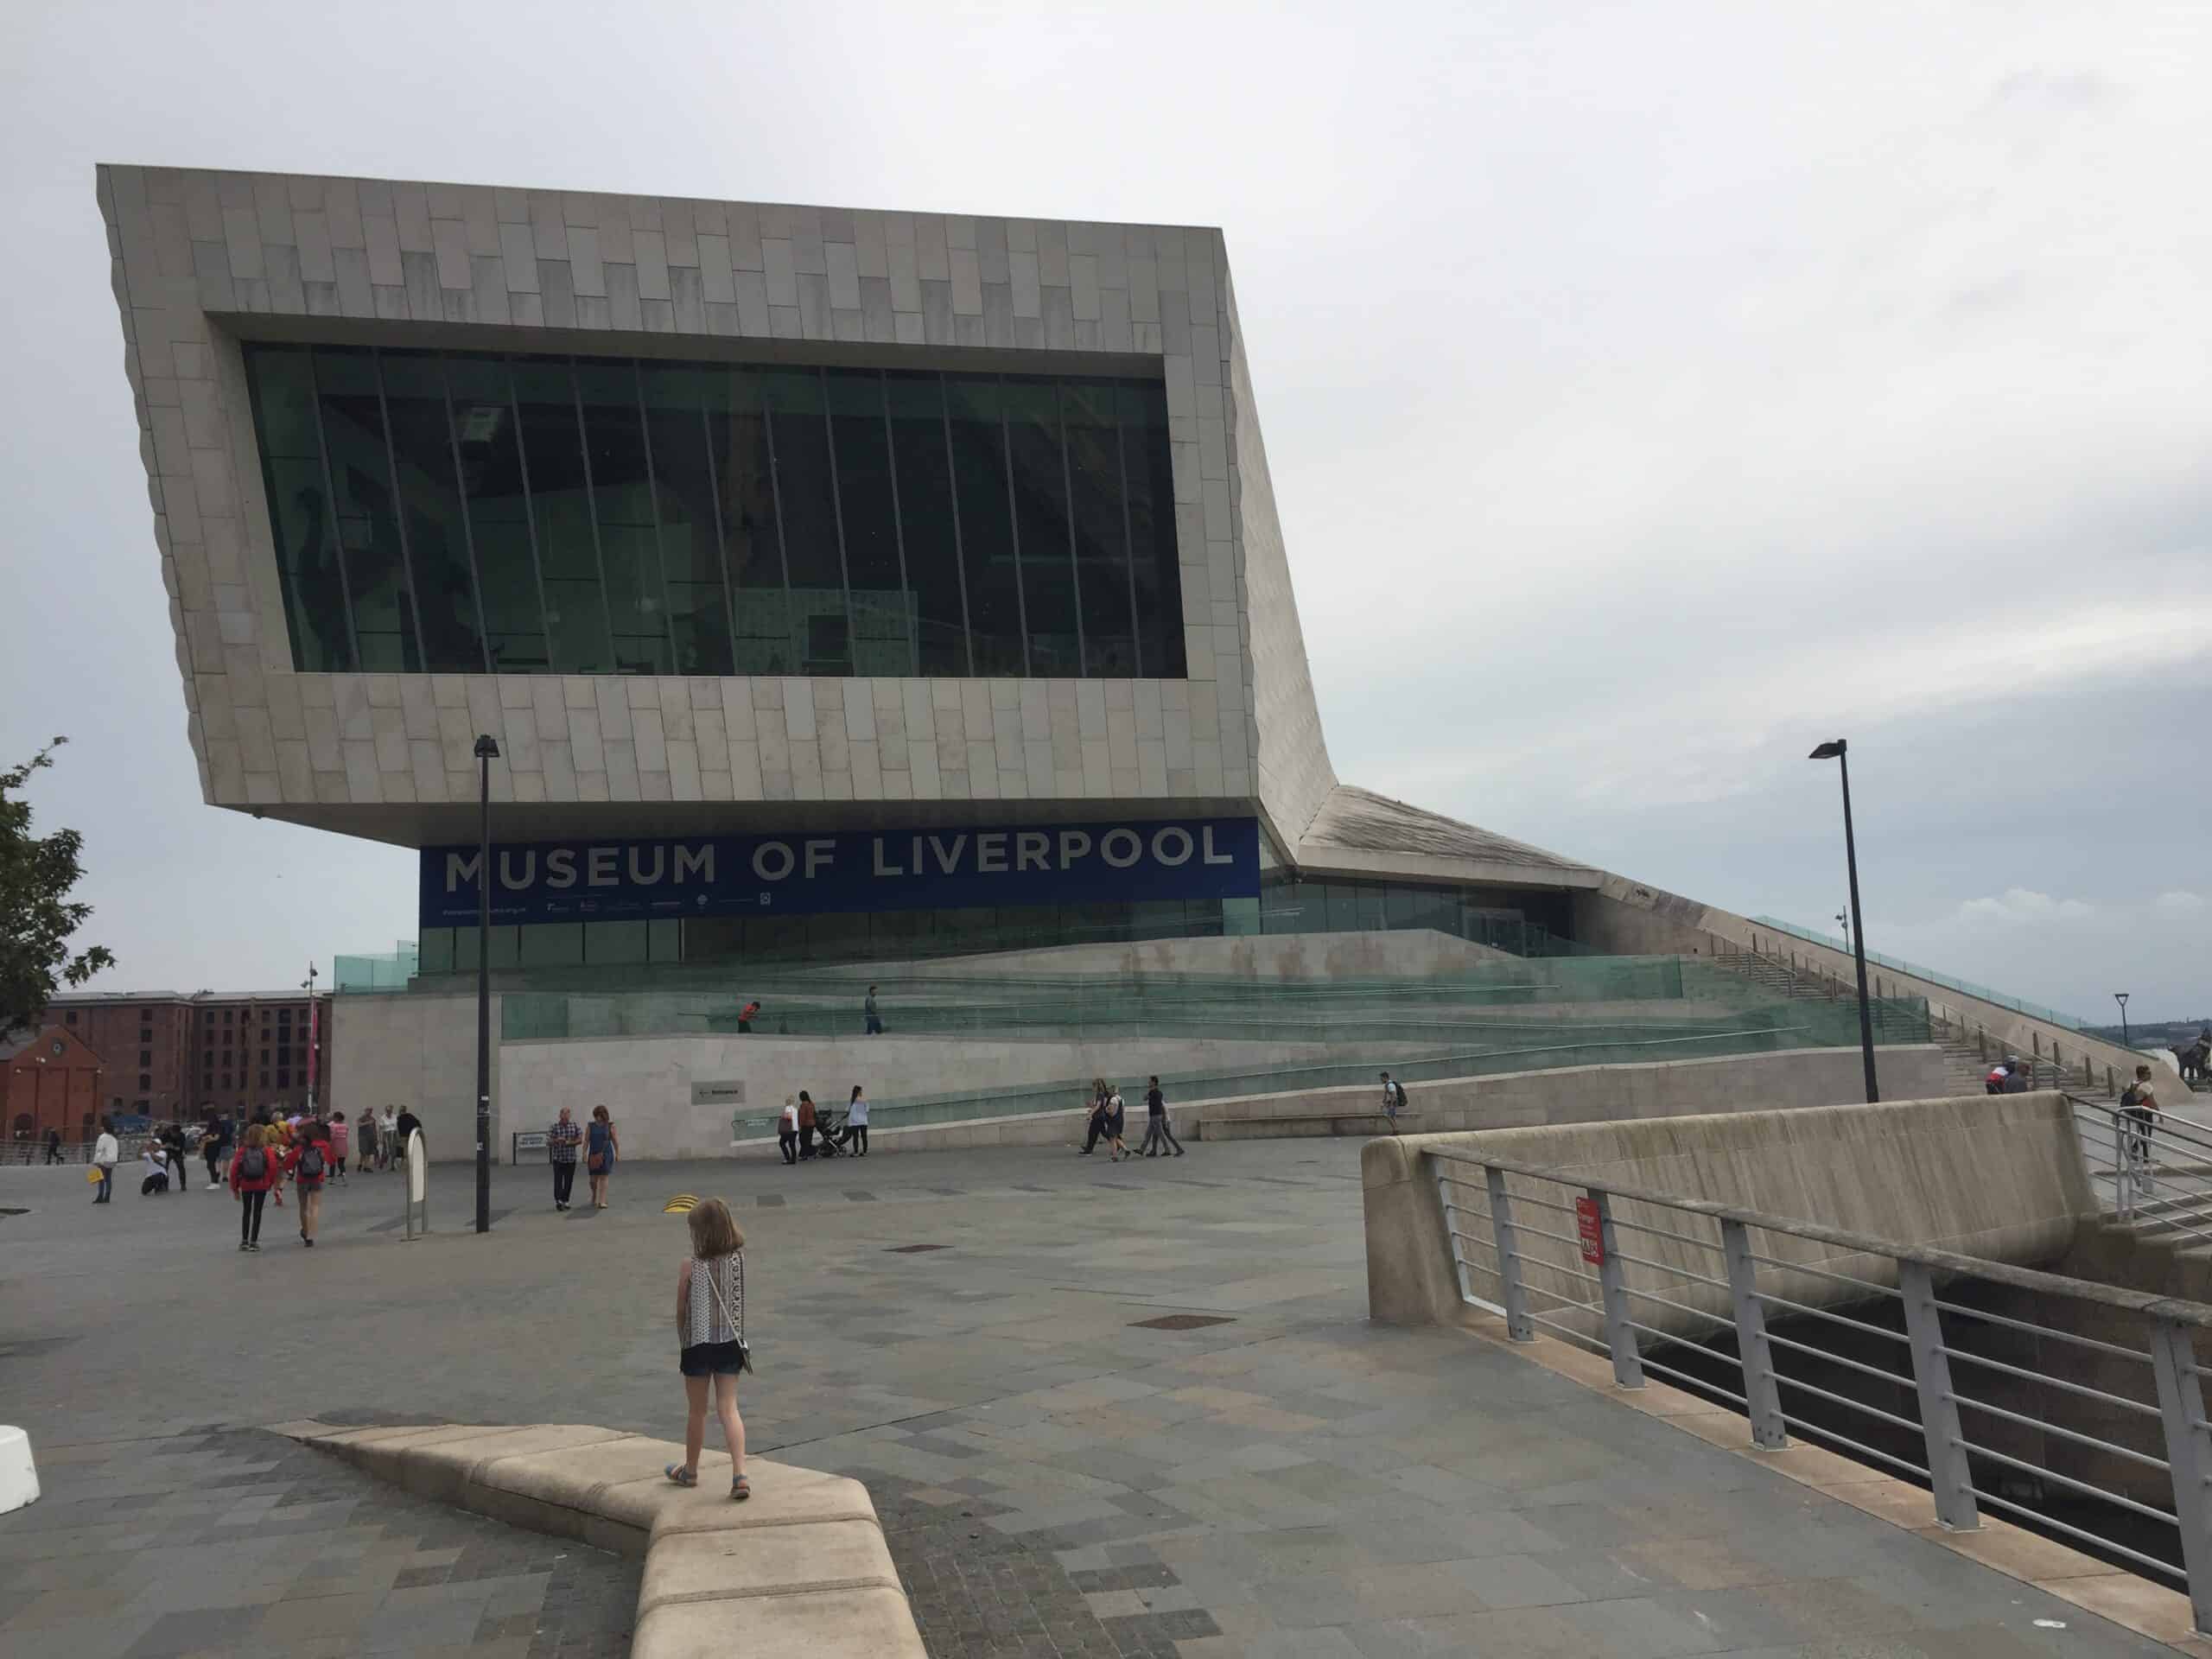 Museum of Liverpool - outside view